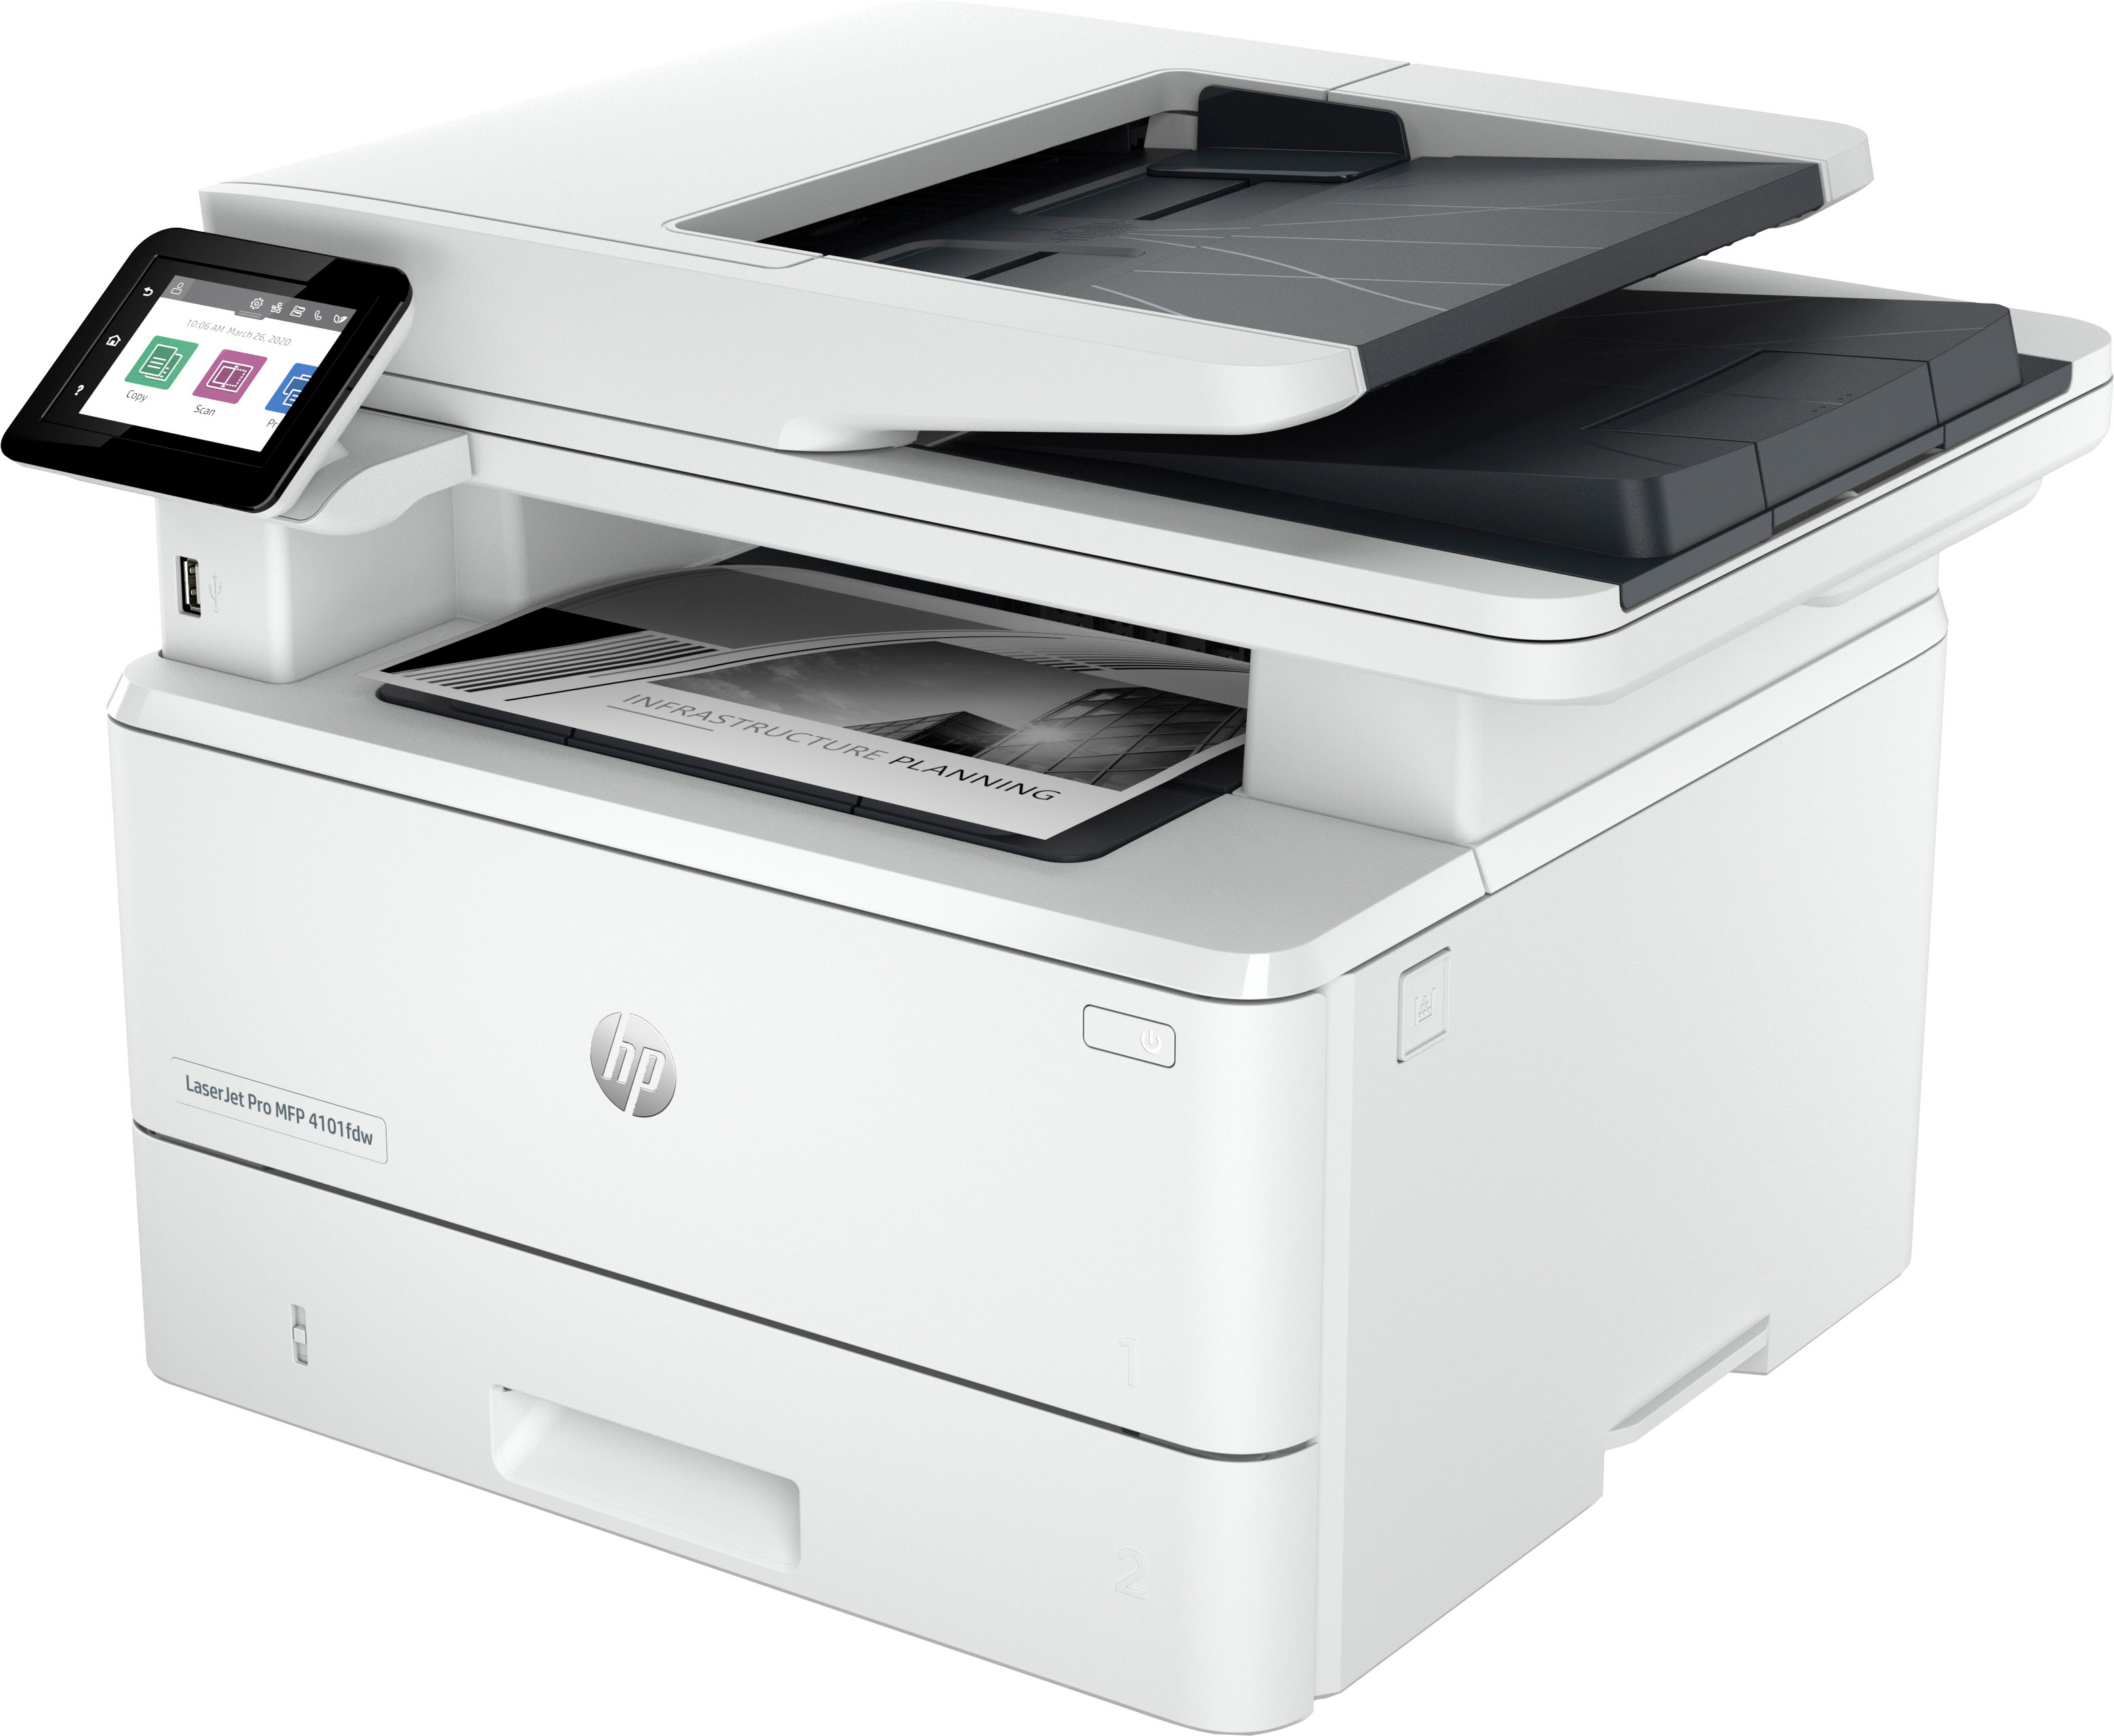 Angle View: HP - LaserJet Pro MFP 4101fdw Wireless Black-and-White All-in-One Laser Printer - White